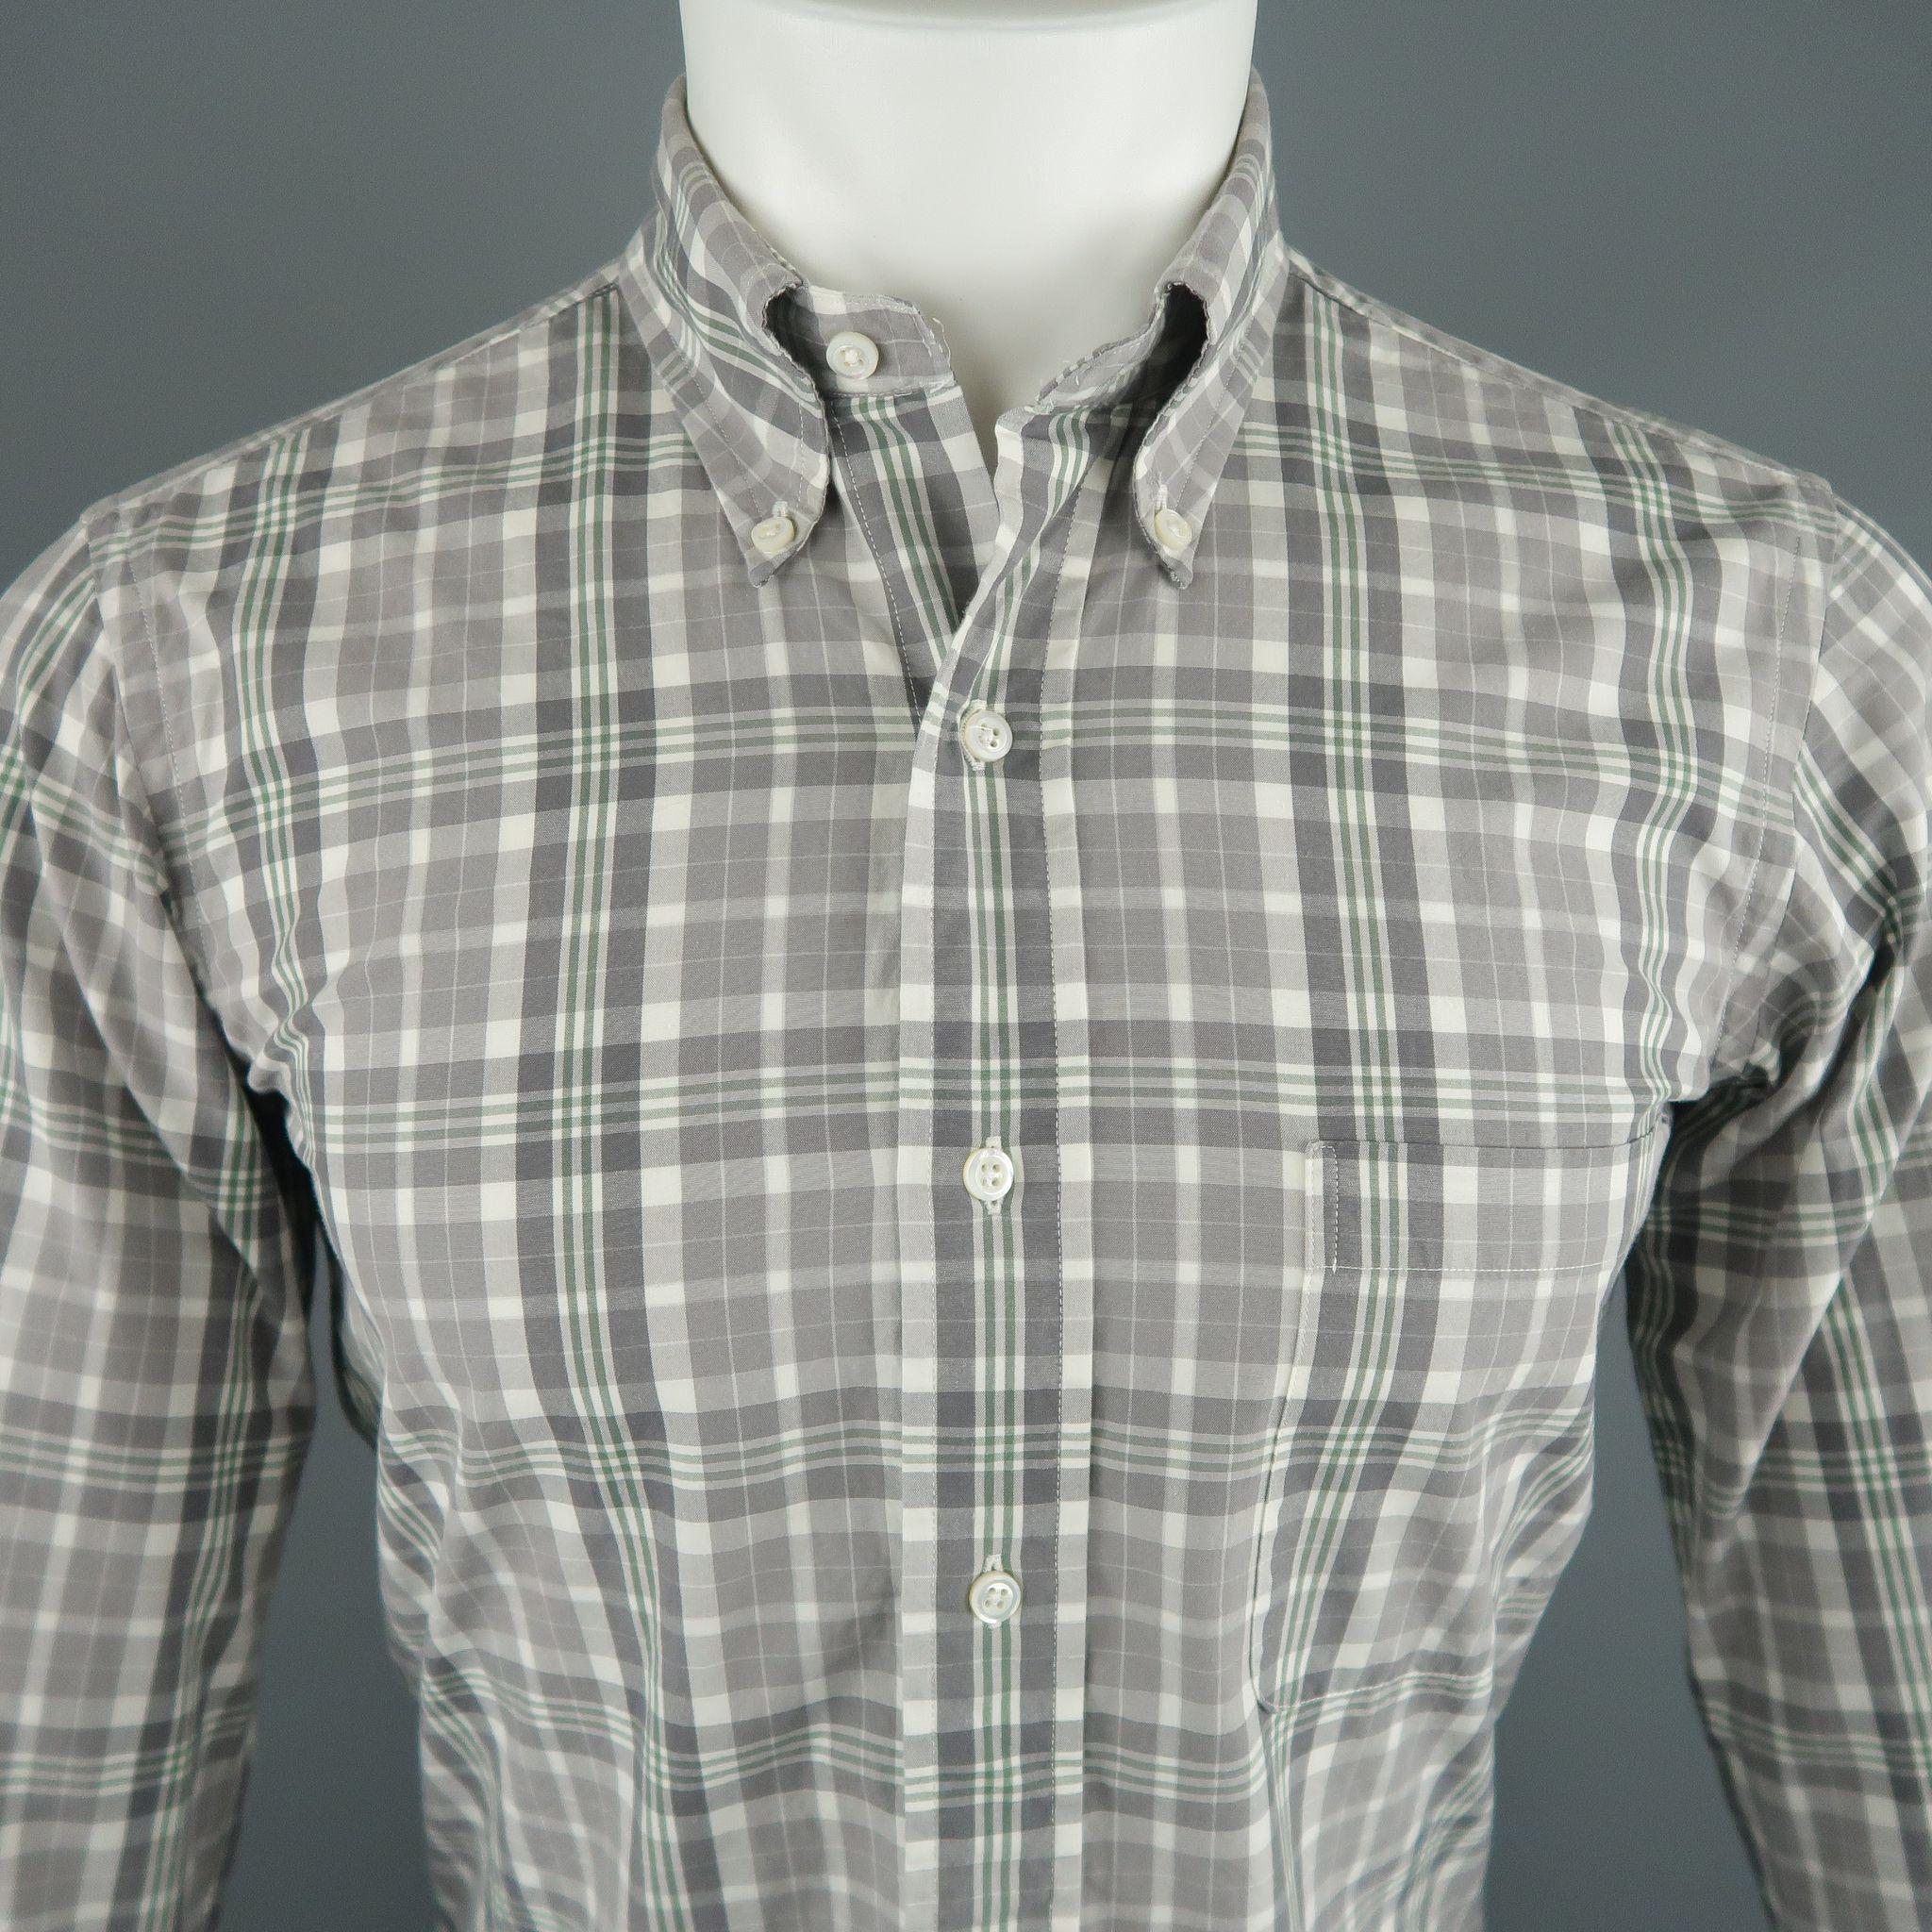 THOM BROWNE Long Sleeve Shirt comes in white, green and grey tones in a plaid cotton material, button down, with a front patch pocket and buttoned cuffs. Made in USA.

Excellent Pre-Owned Condition.
Marked: 1
 
Measurements:
 
Shoulder: 16